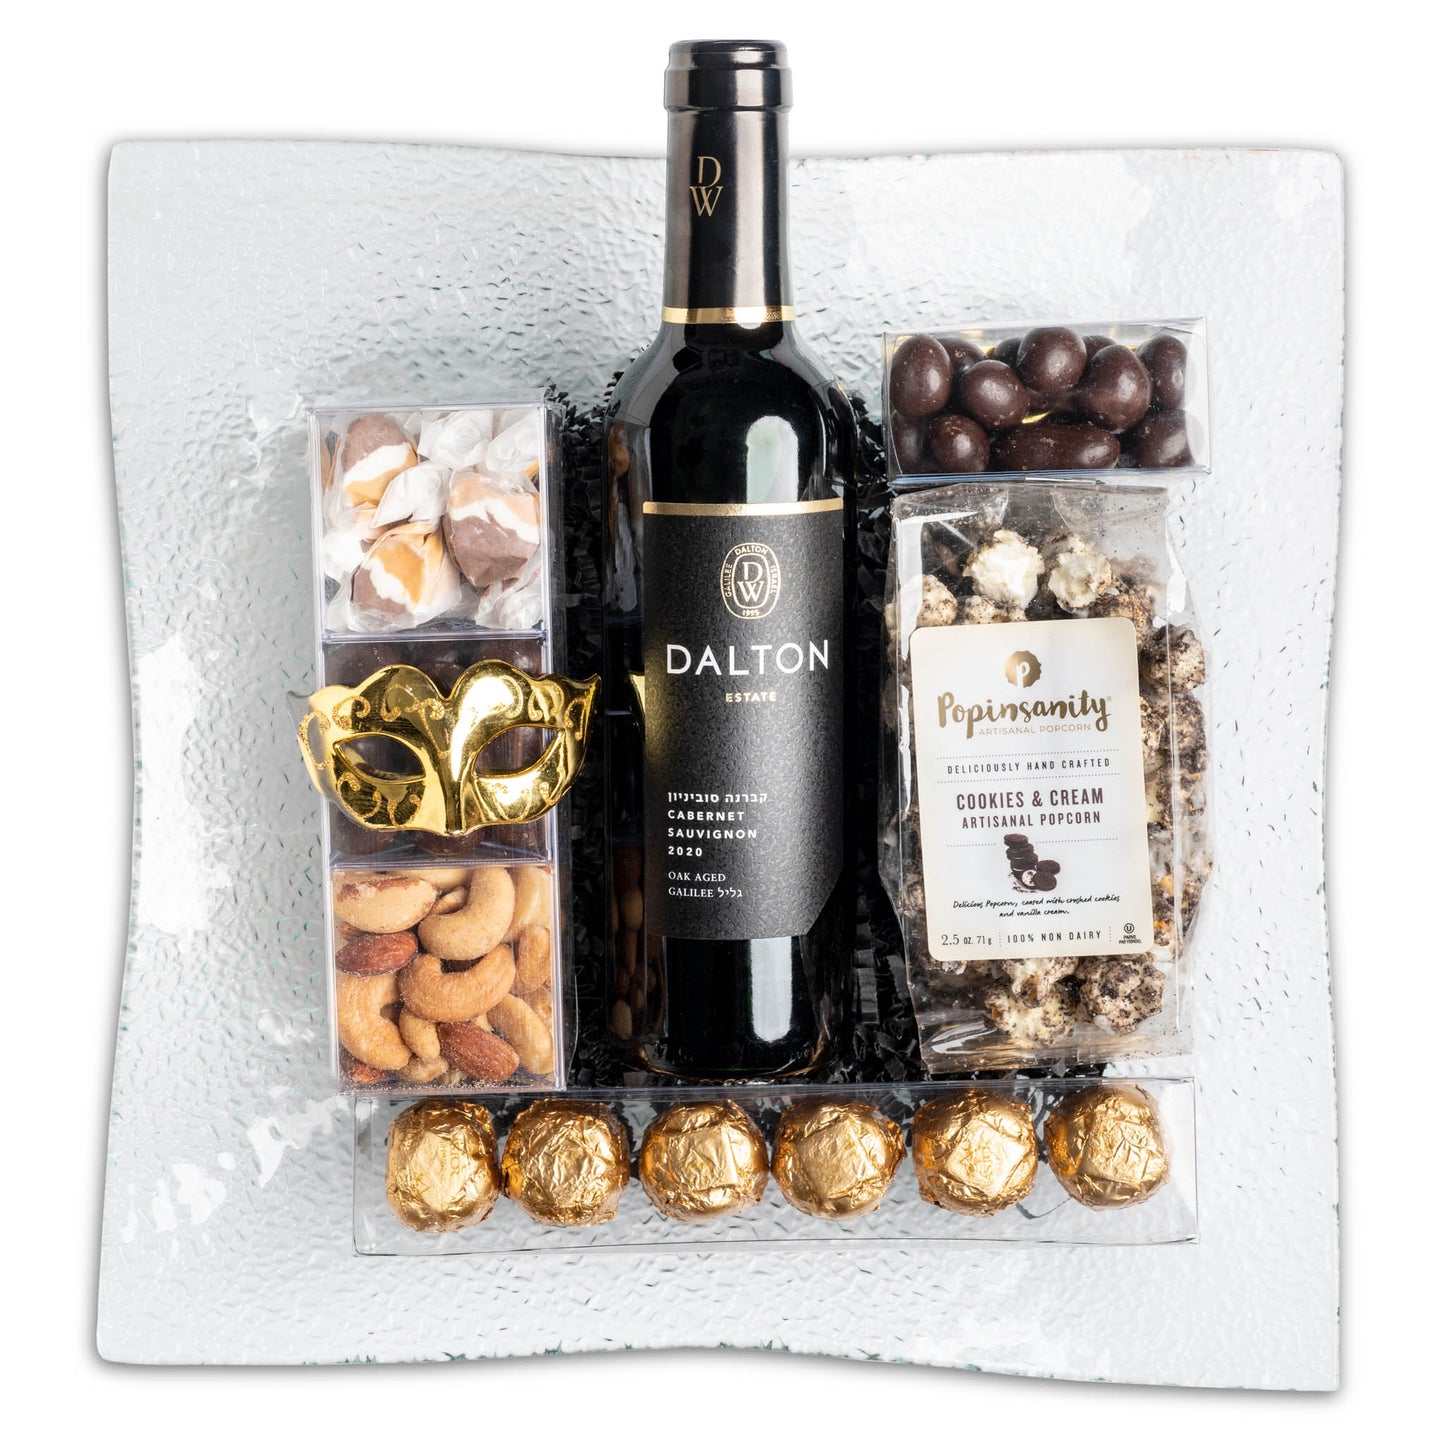 Pebbled Glass Tray with Wine and Treats